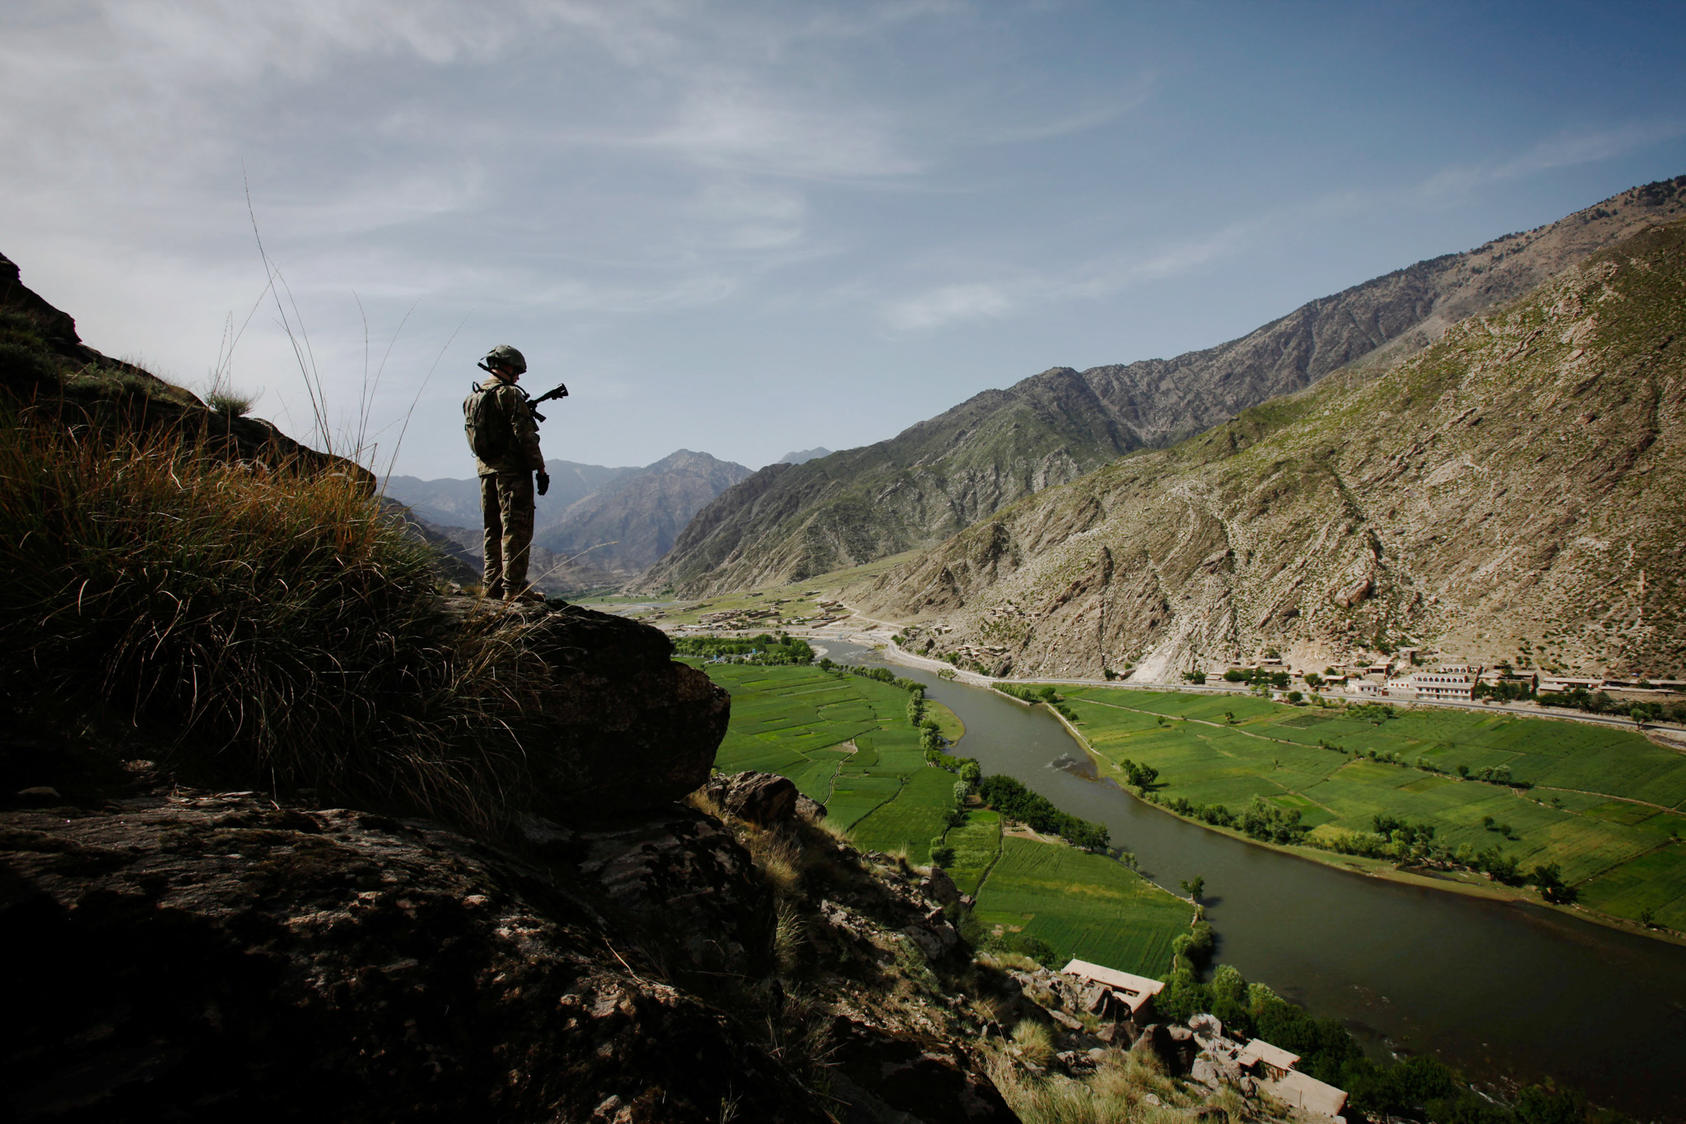 A soldier with U.S. Army's 4th Brigade looks over the Pech Valley in the Kunar province of Afghanistan, April 13, 2010. Photo Courtesy of The New York Times/Christoph Bangert